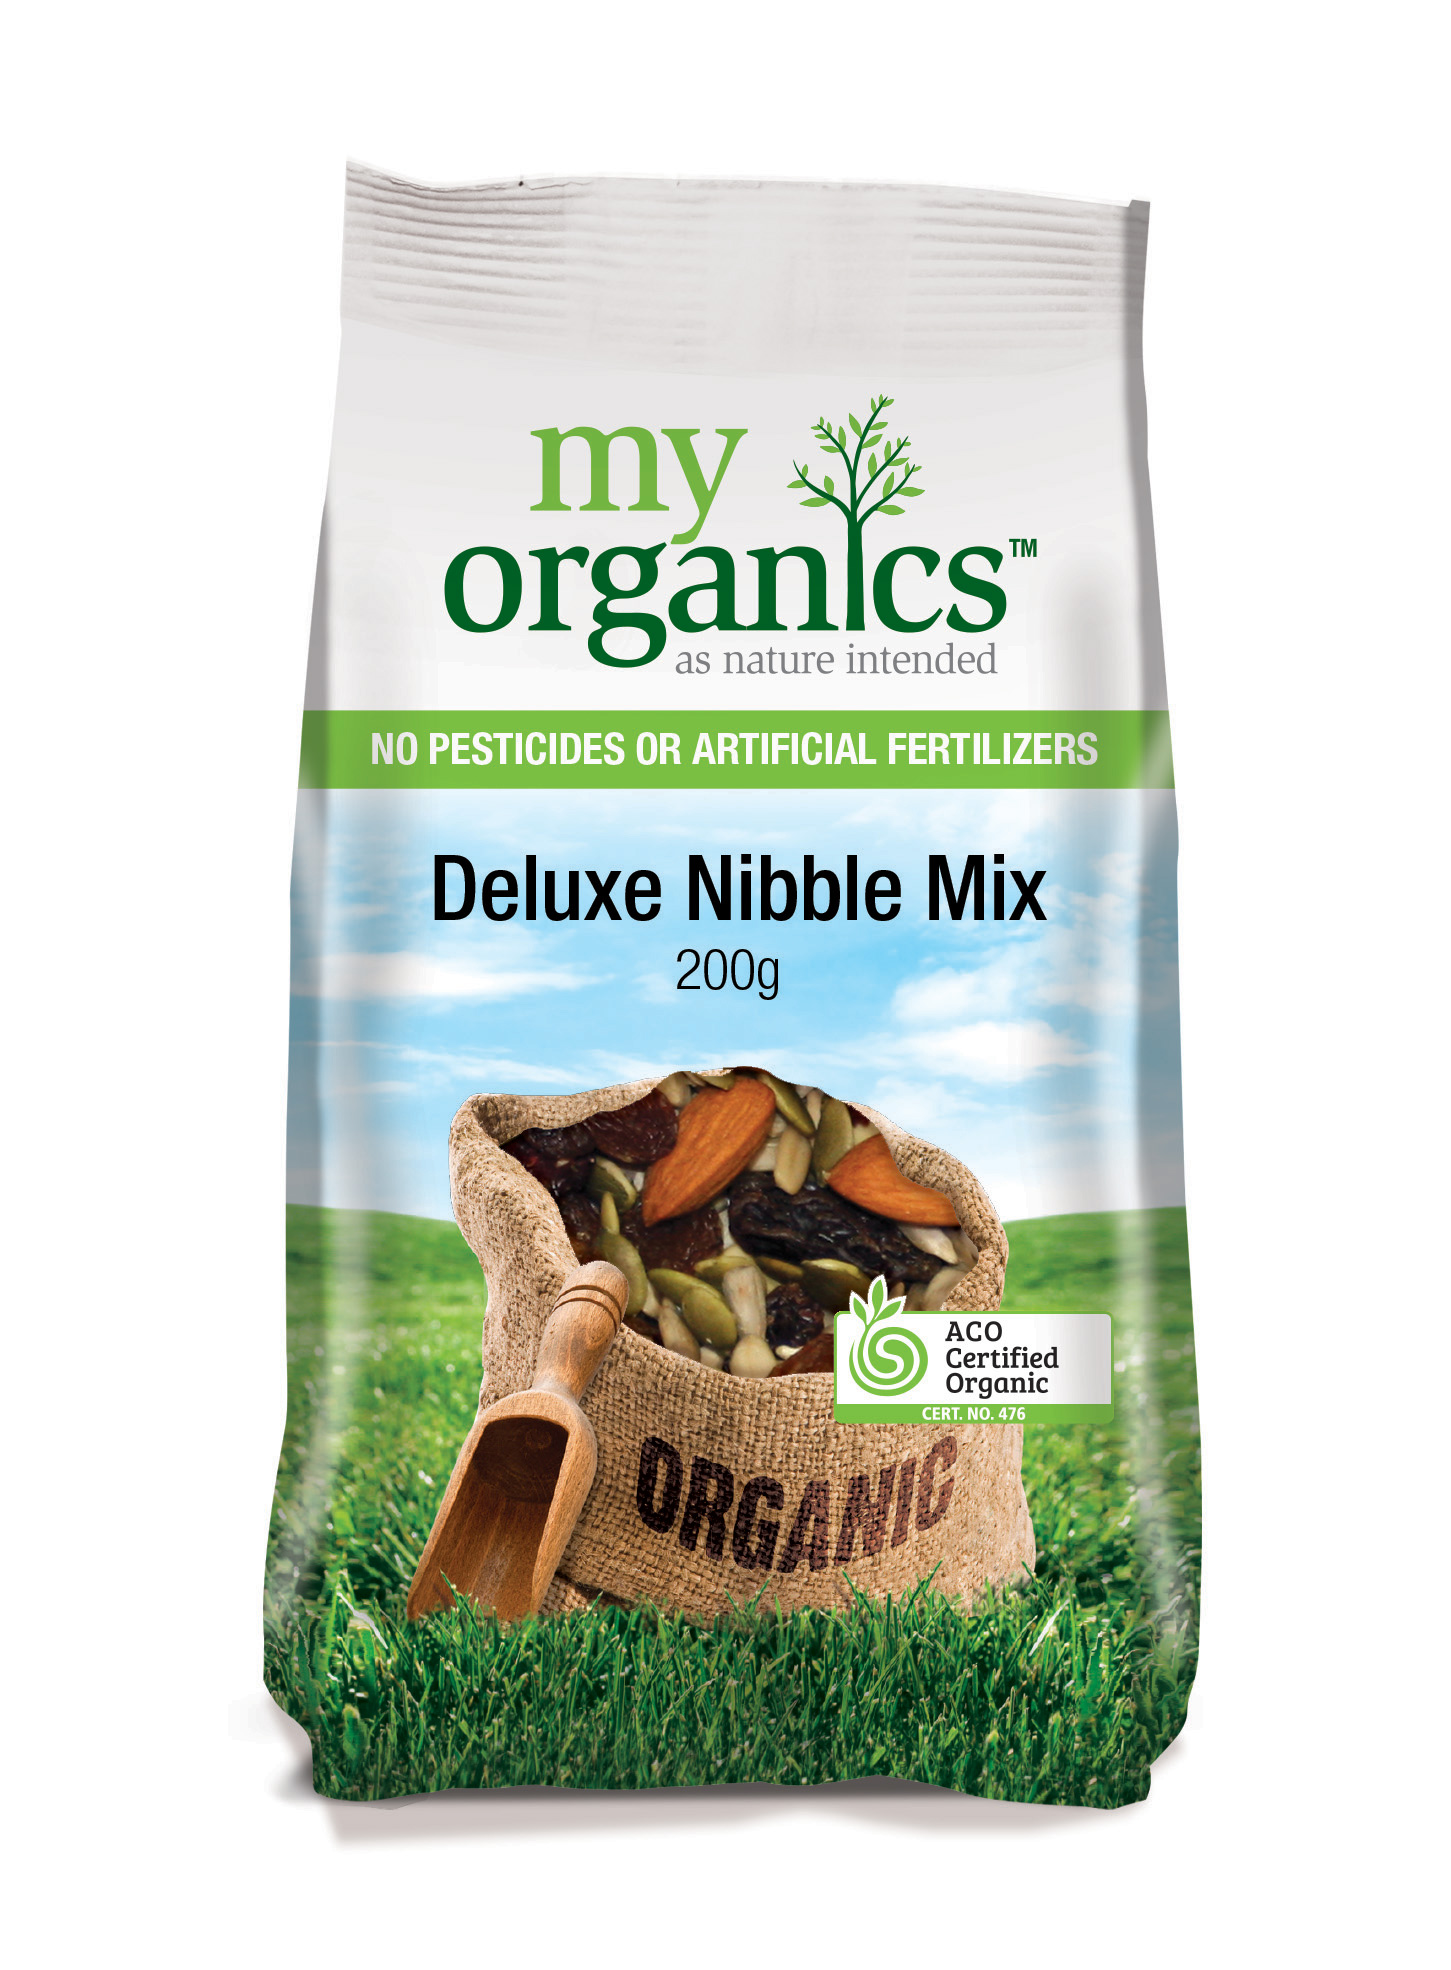 Deluxe Nibble Mix